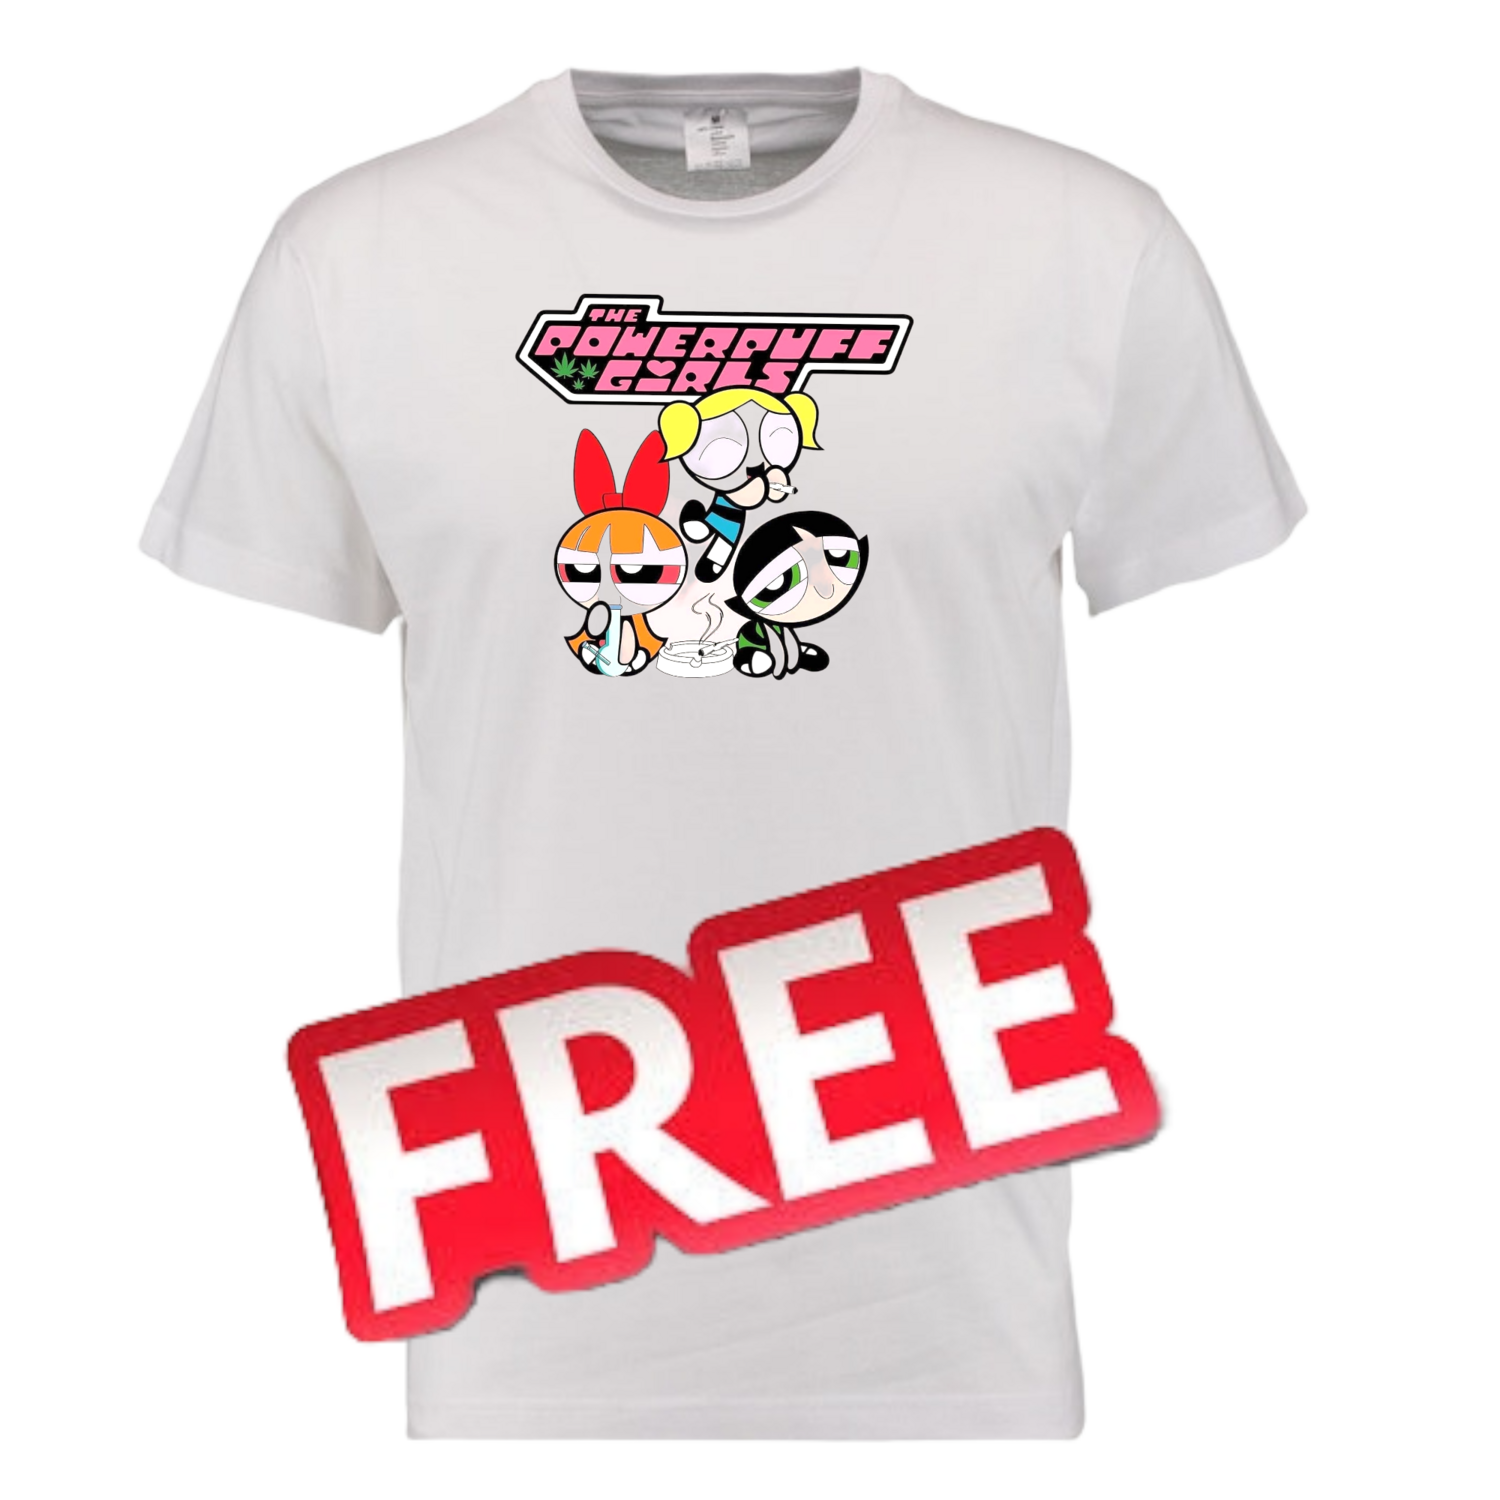 FREE tee power puff gals EDITION
Only small to xl is free anything bigger is a lil extra